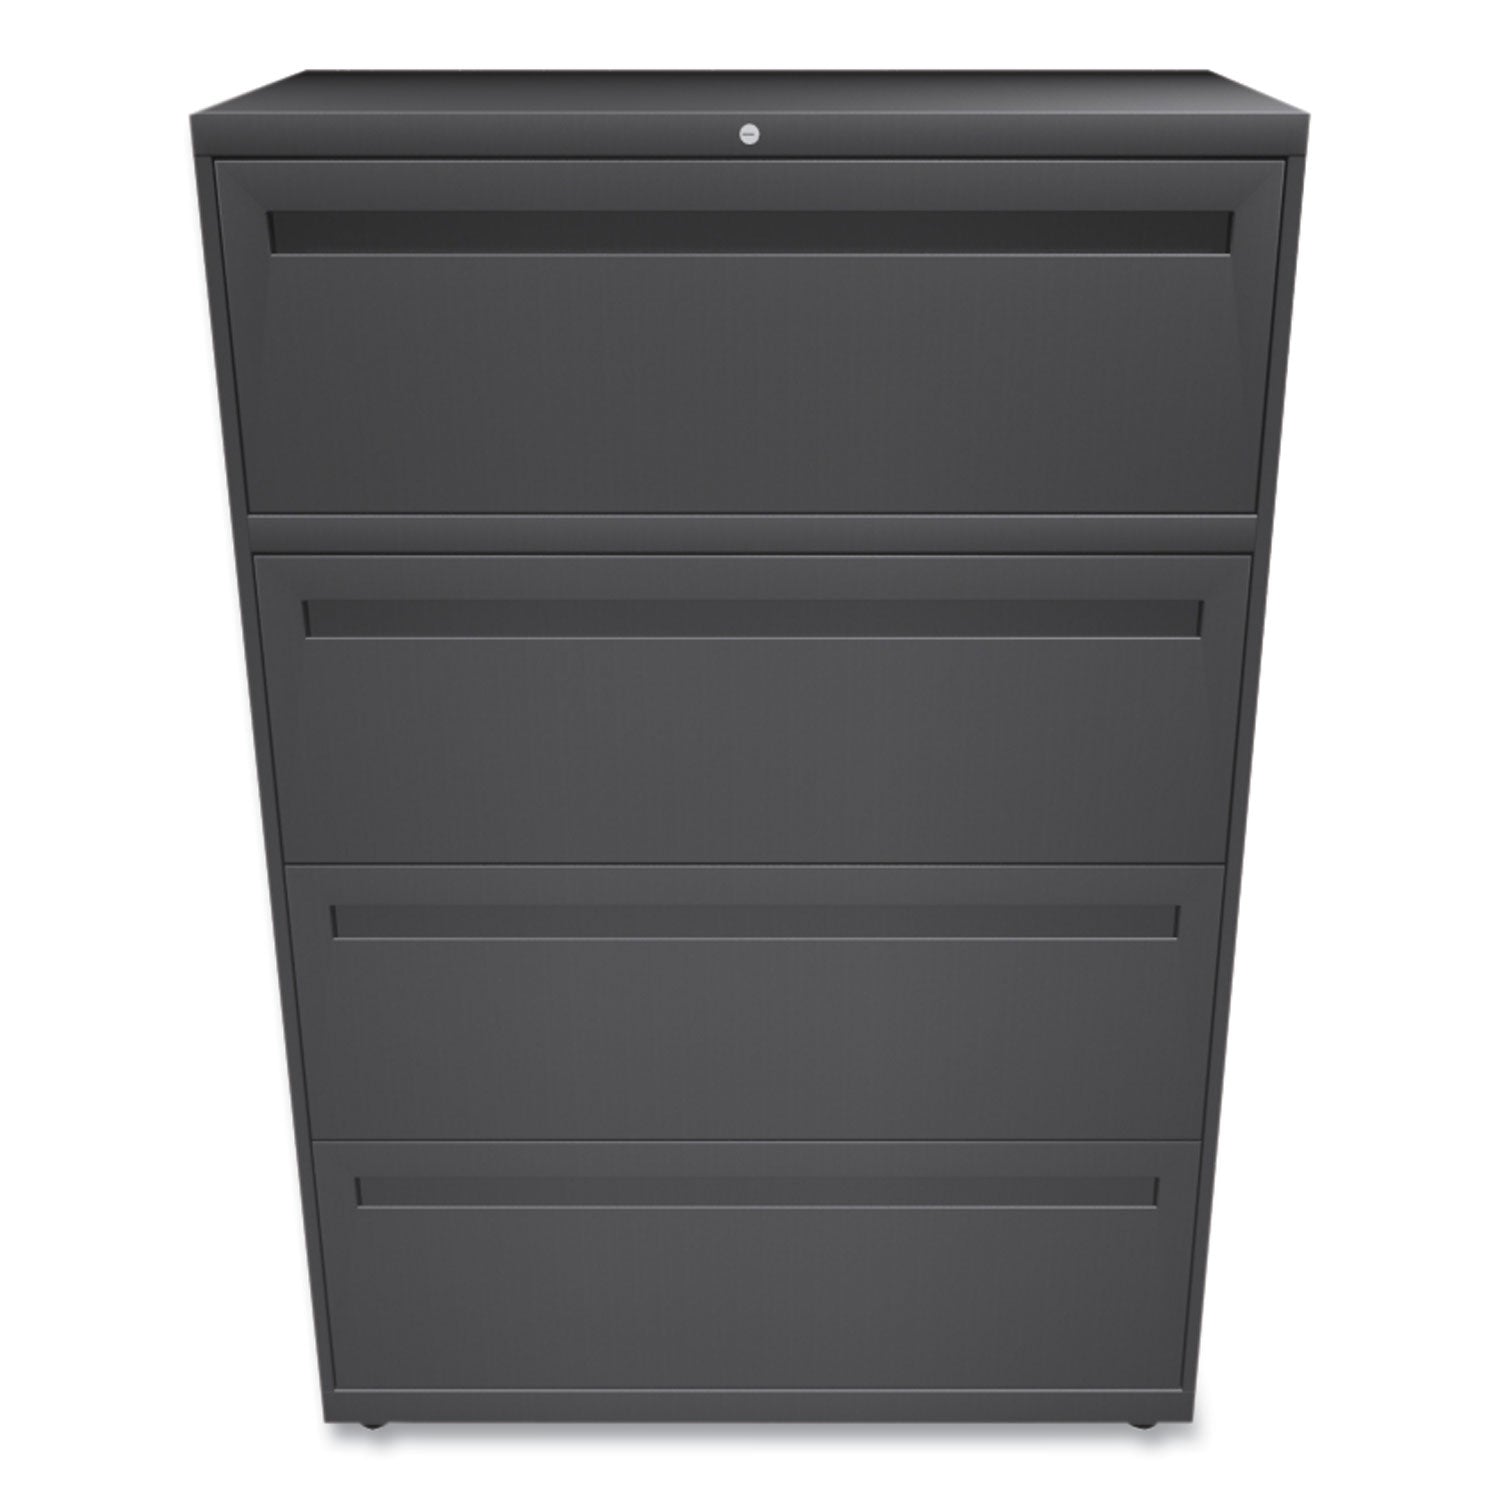 Brigade 700 Series Lateral File, 4 Legal/Letter-Size File Drawers, Charcoal, 36" x 18" x 52.5 - 